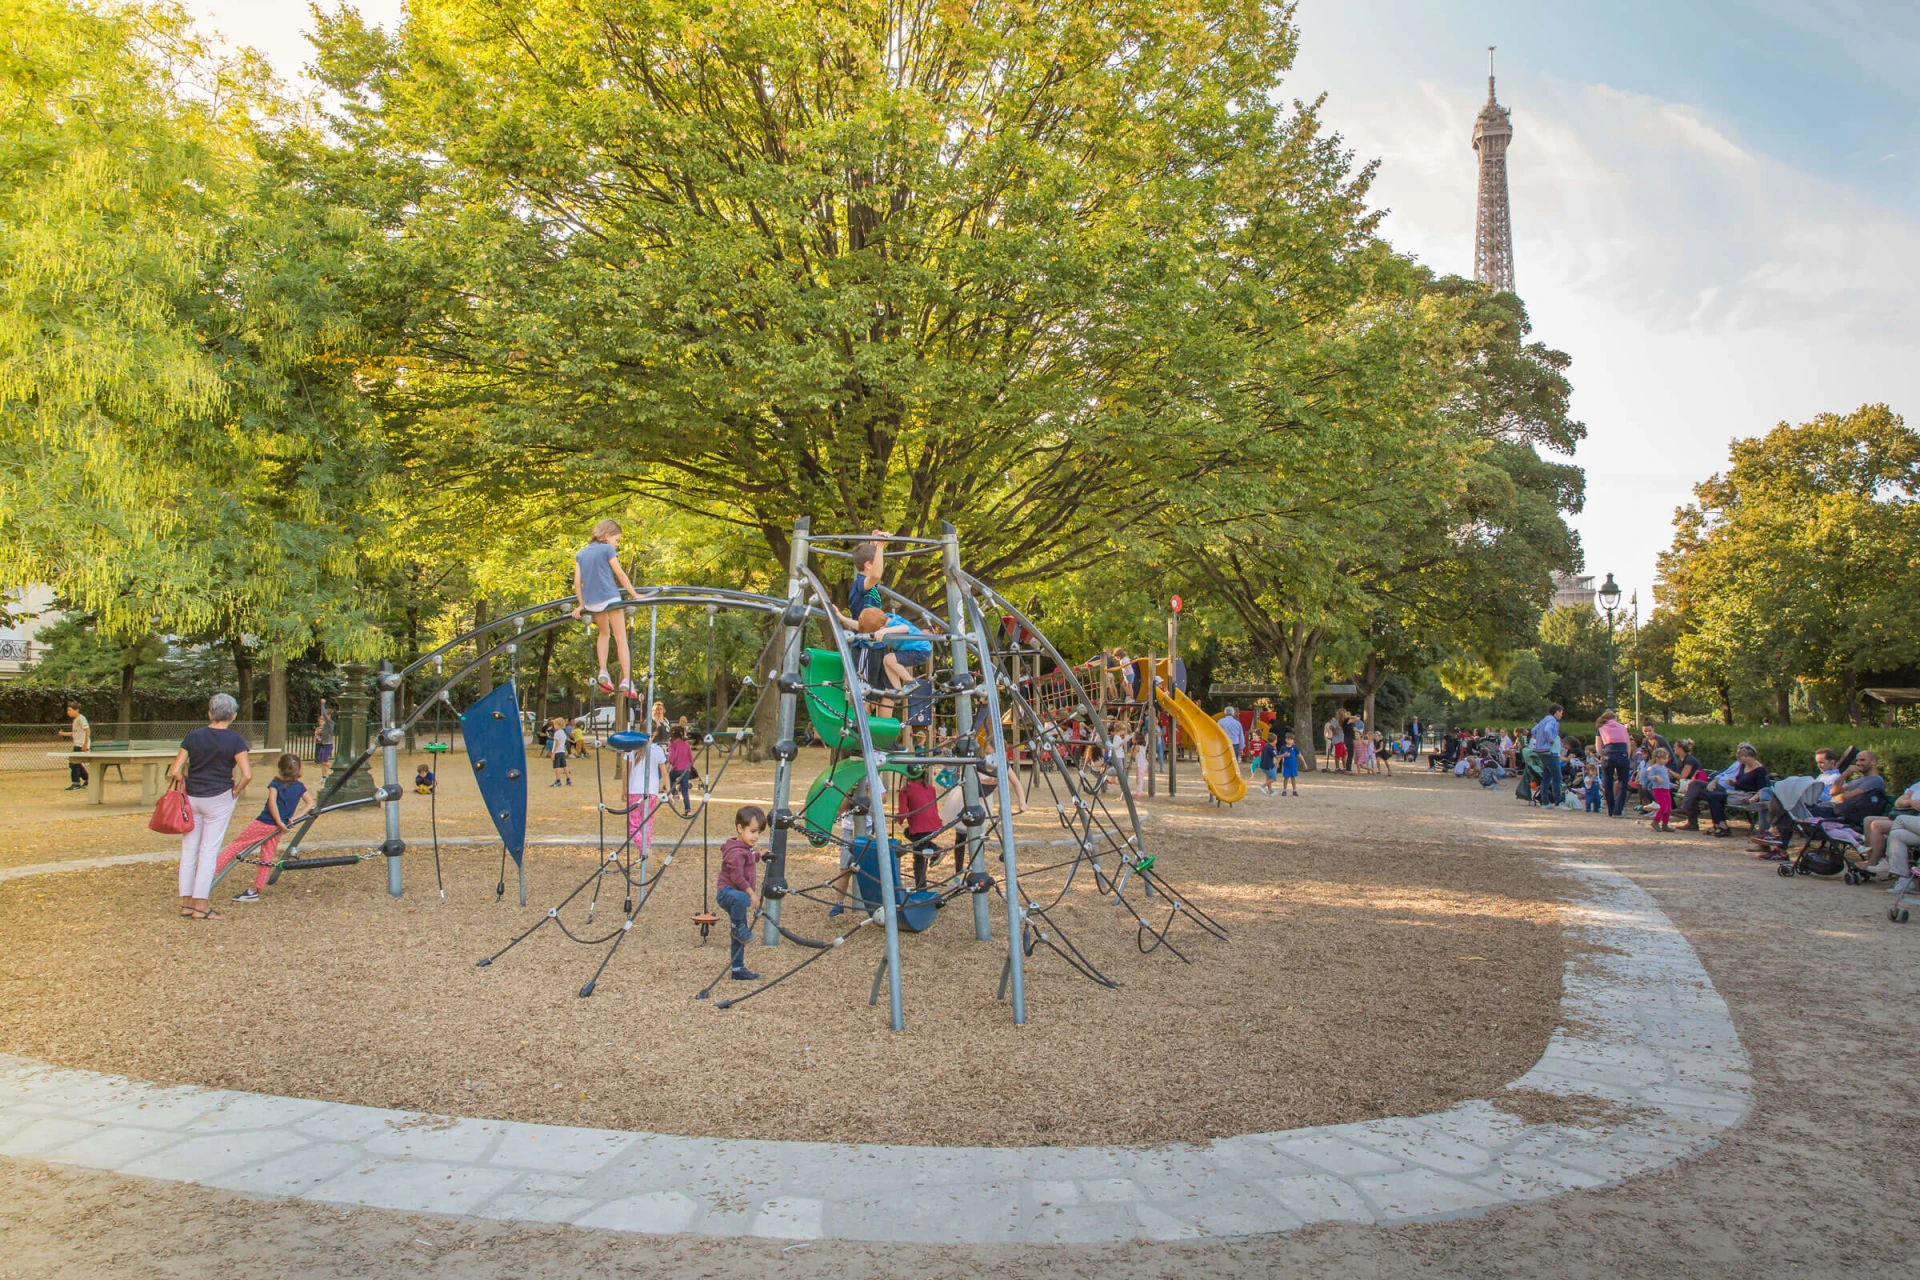 Playground climbing structure by the Eiffel Tower